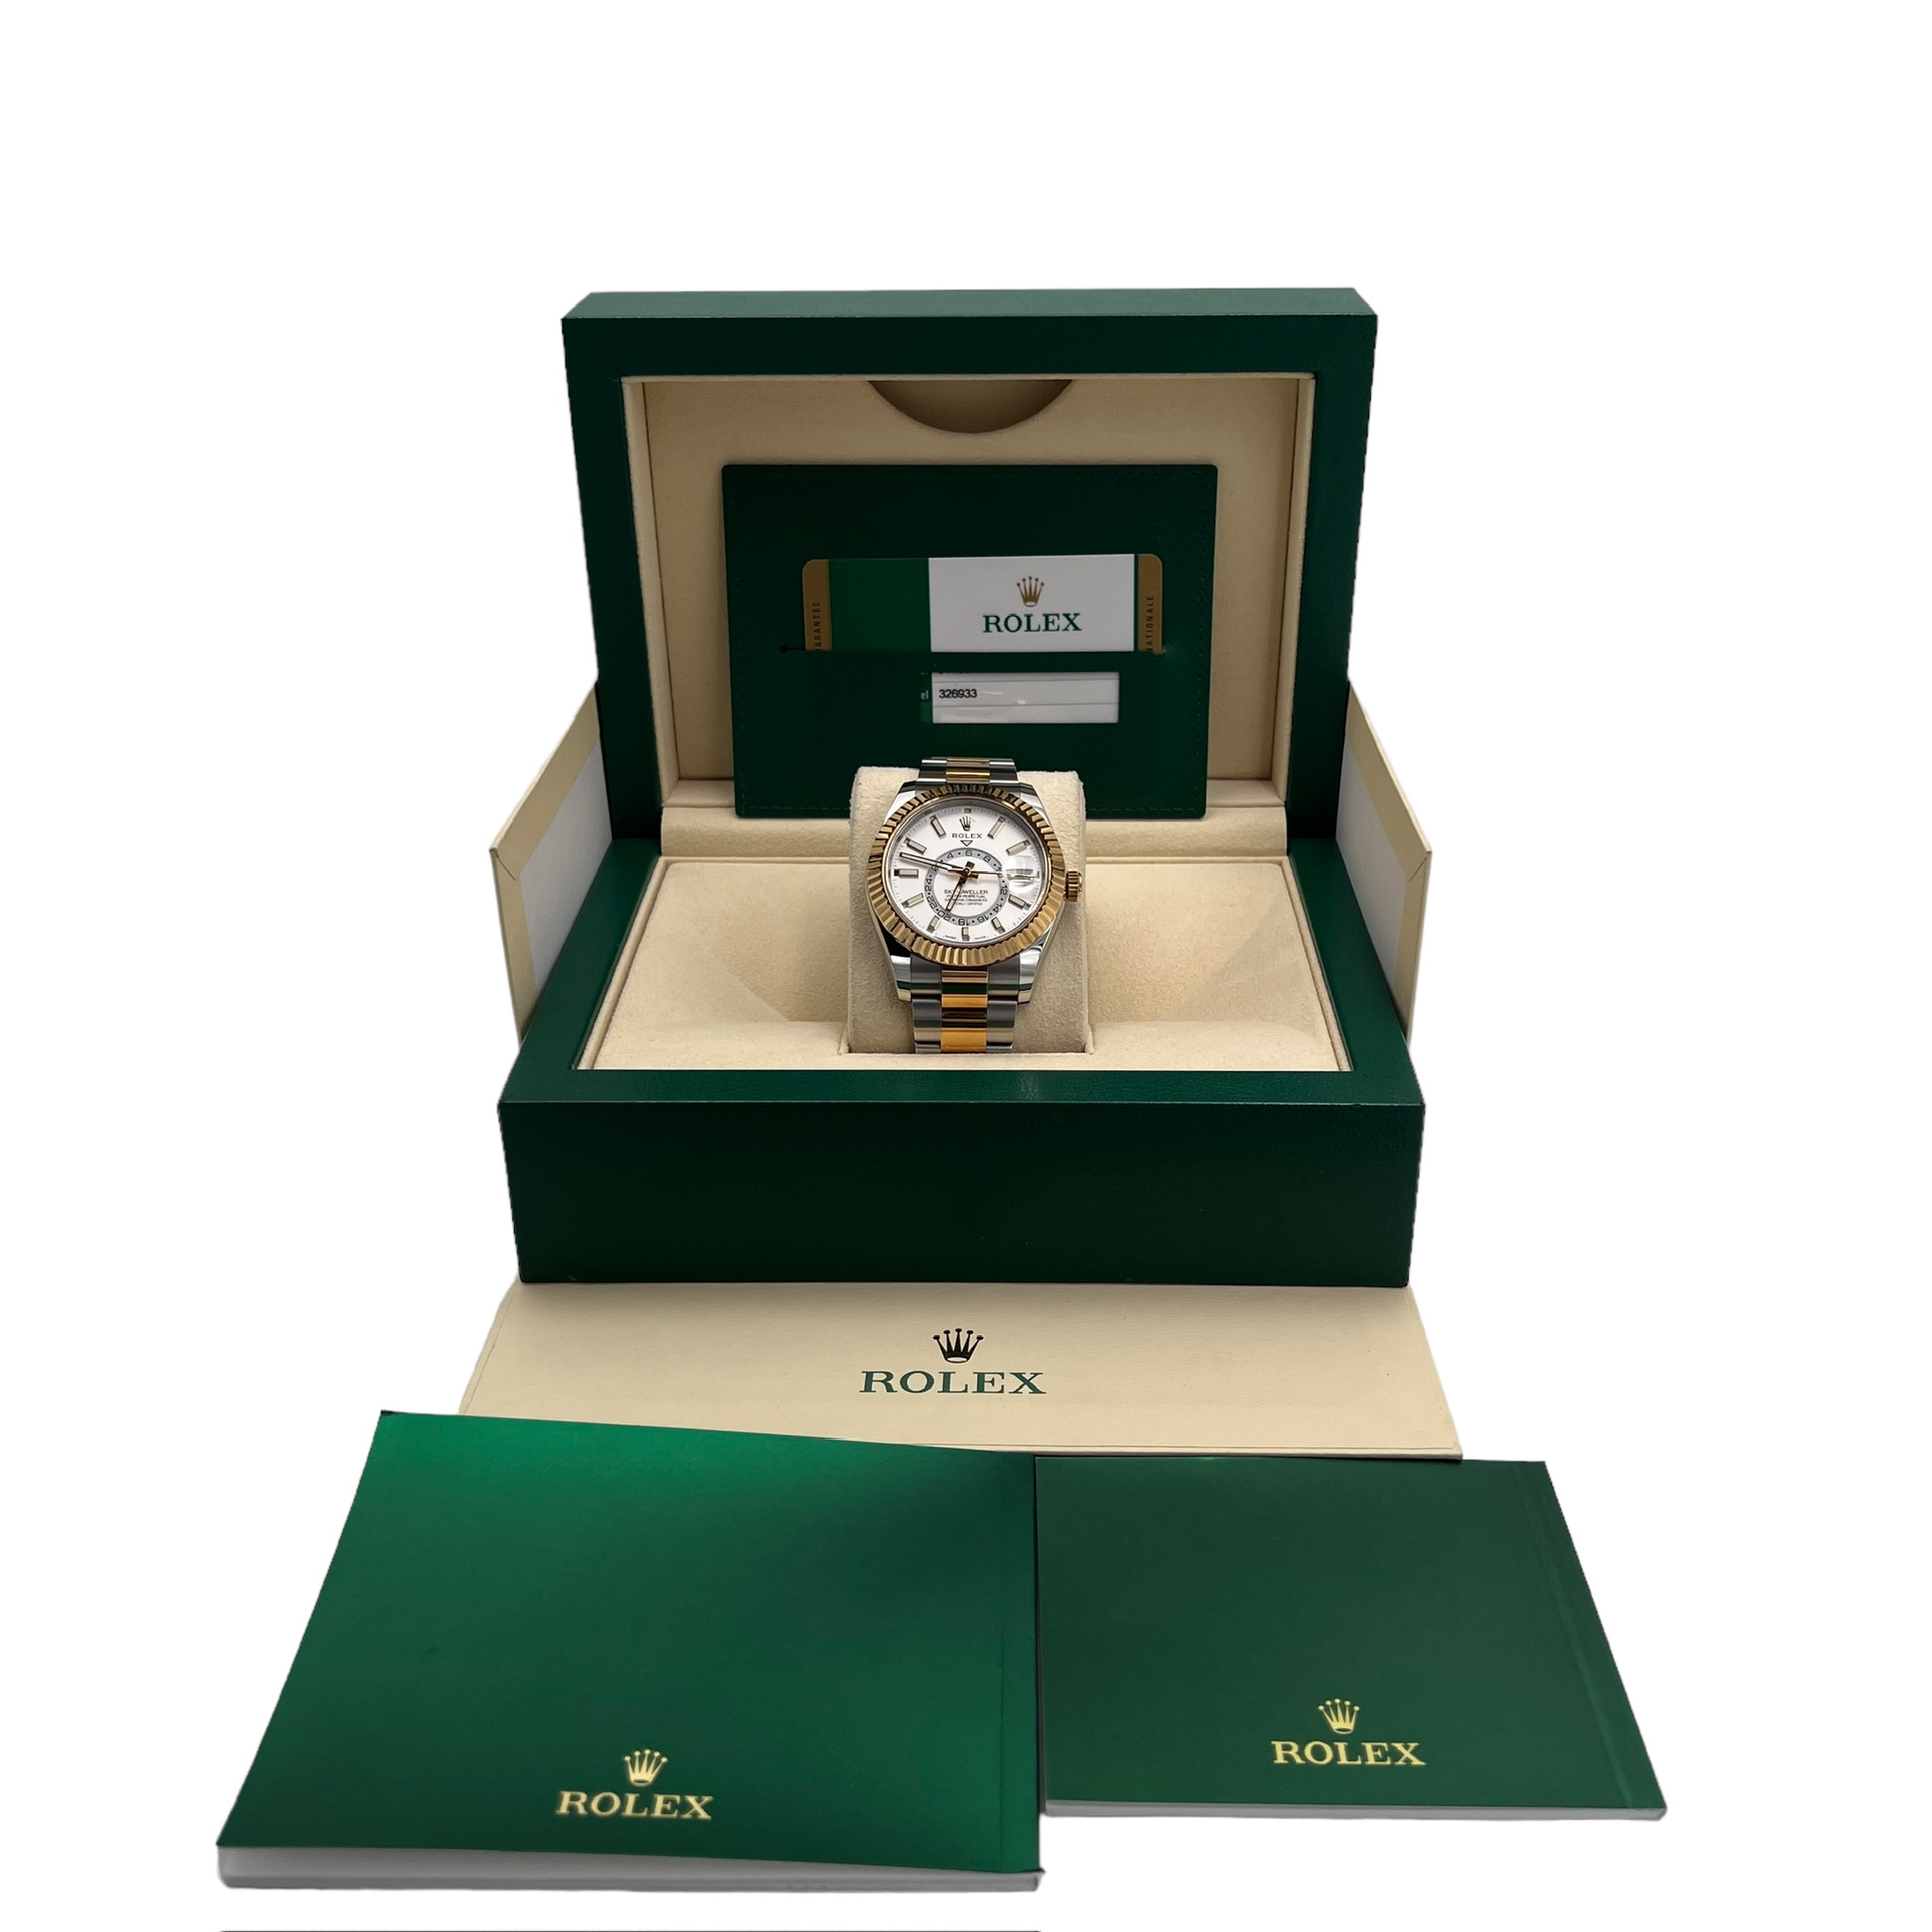 Rolex Sky-Dweller Yellow Gold and Stainless Steel White Dial 326933 ｜ Full Set